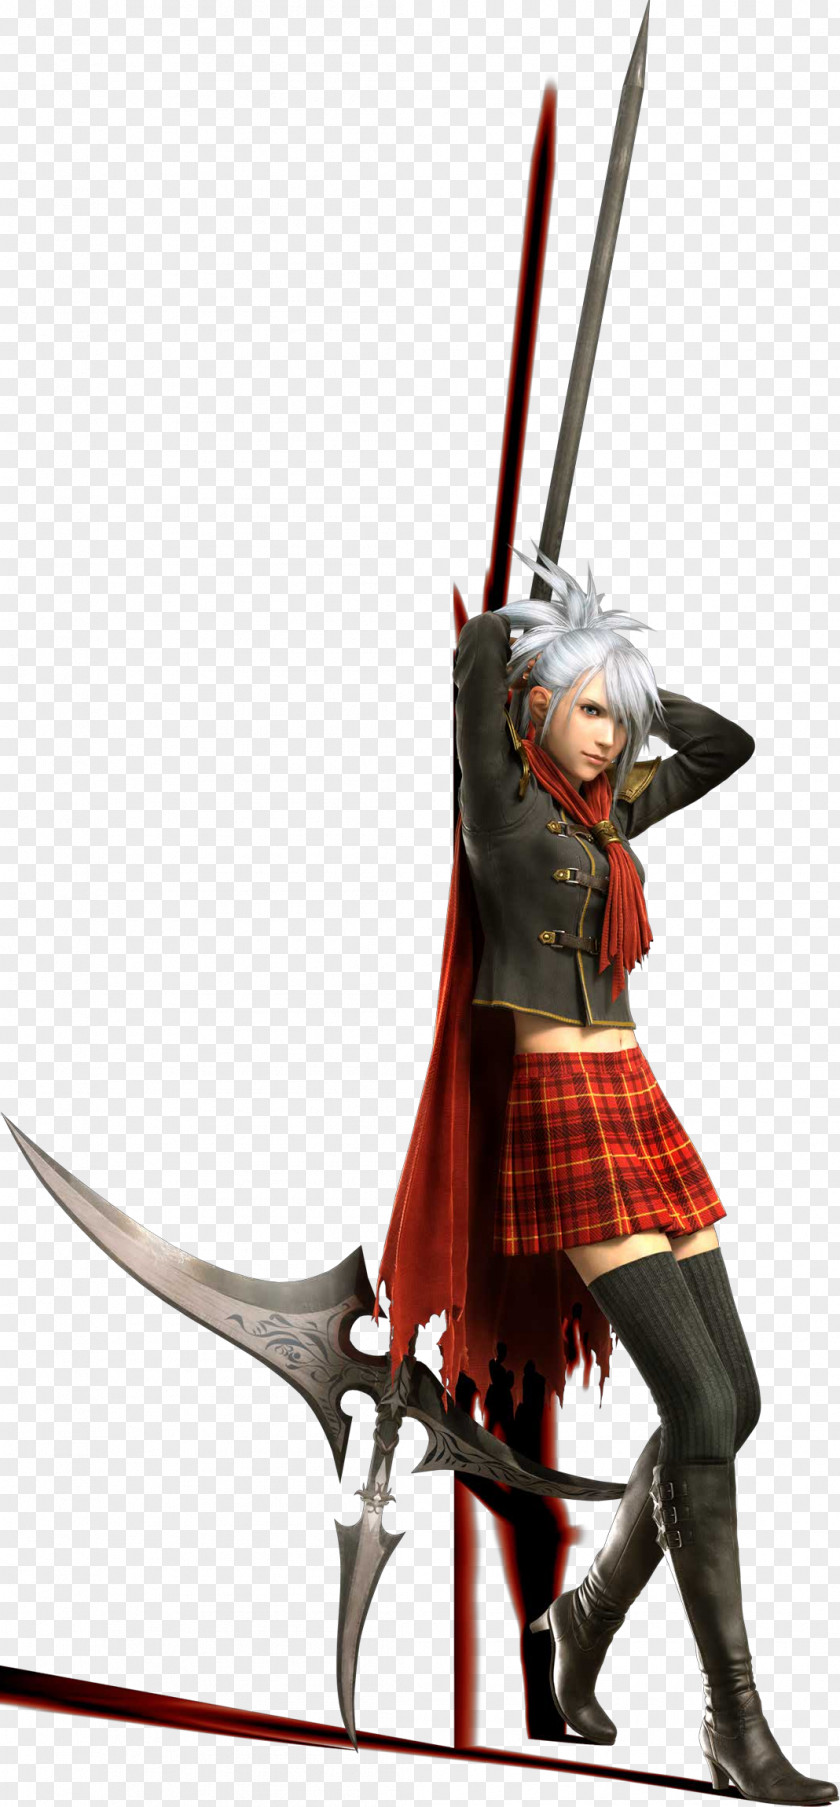 Final Fantasy Type-0 Lightning Returns: XIII Agito VII PNG